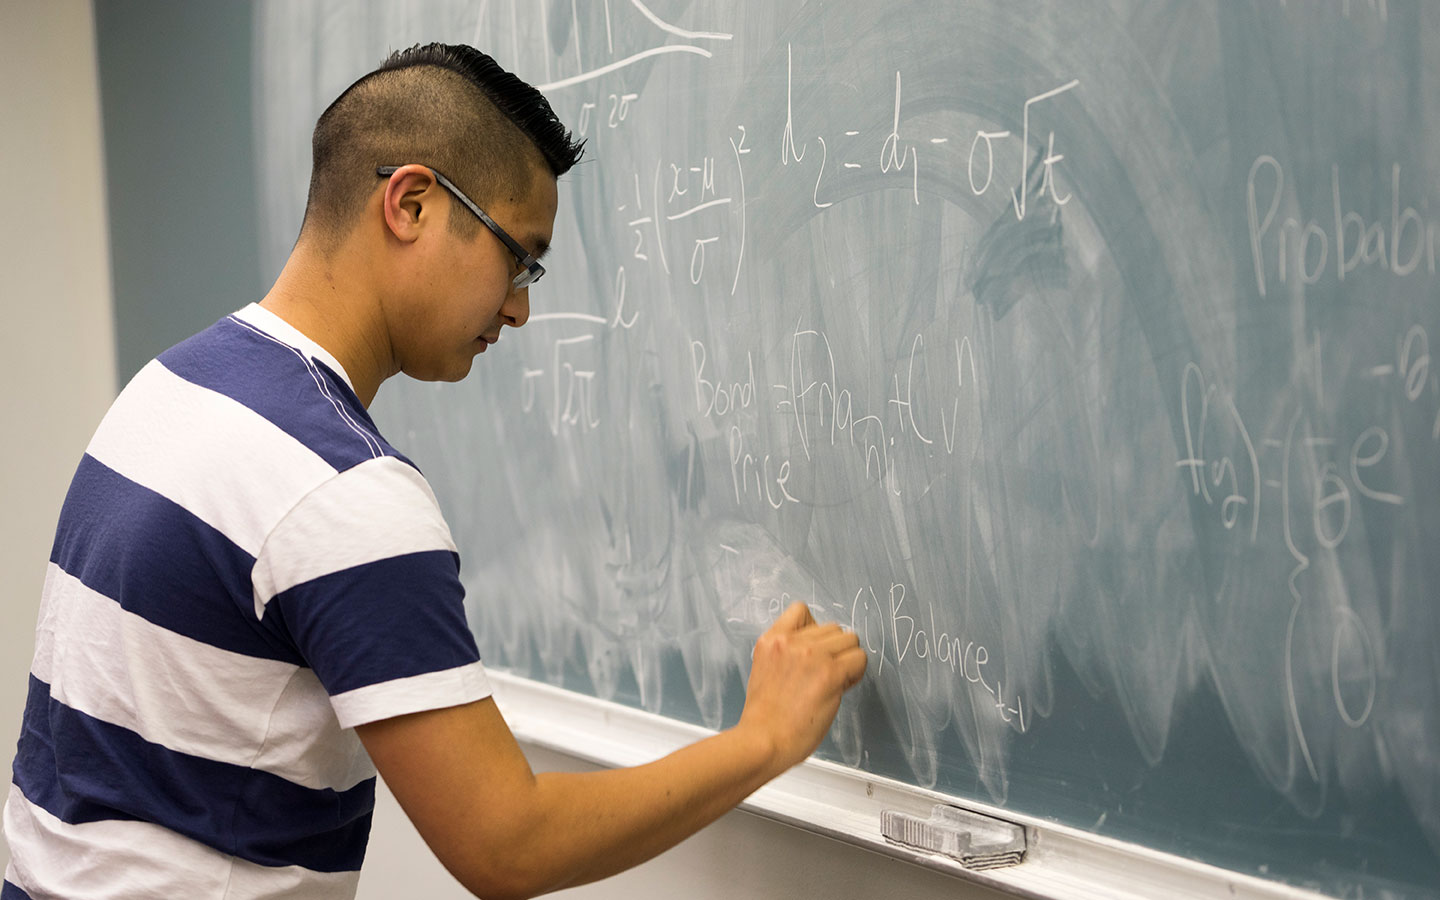 Student at chalkboard doing equations - actuaries